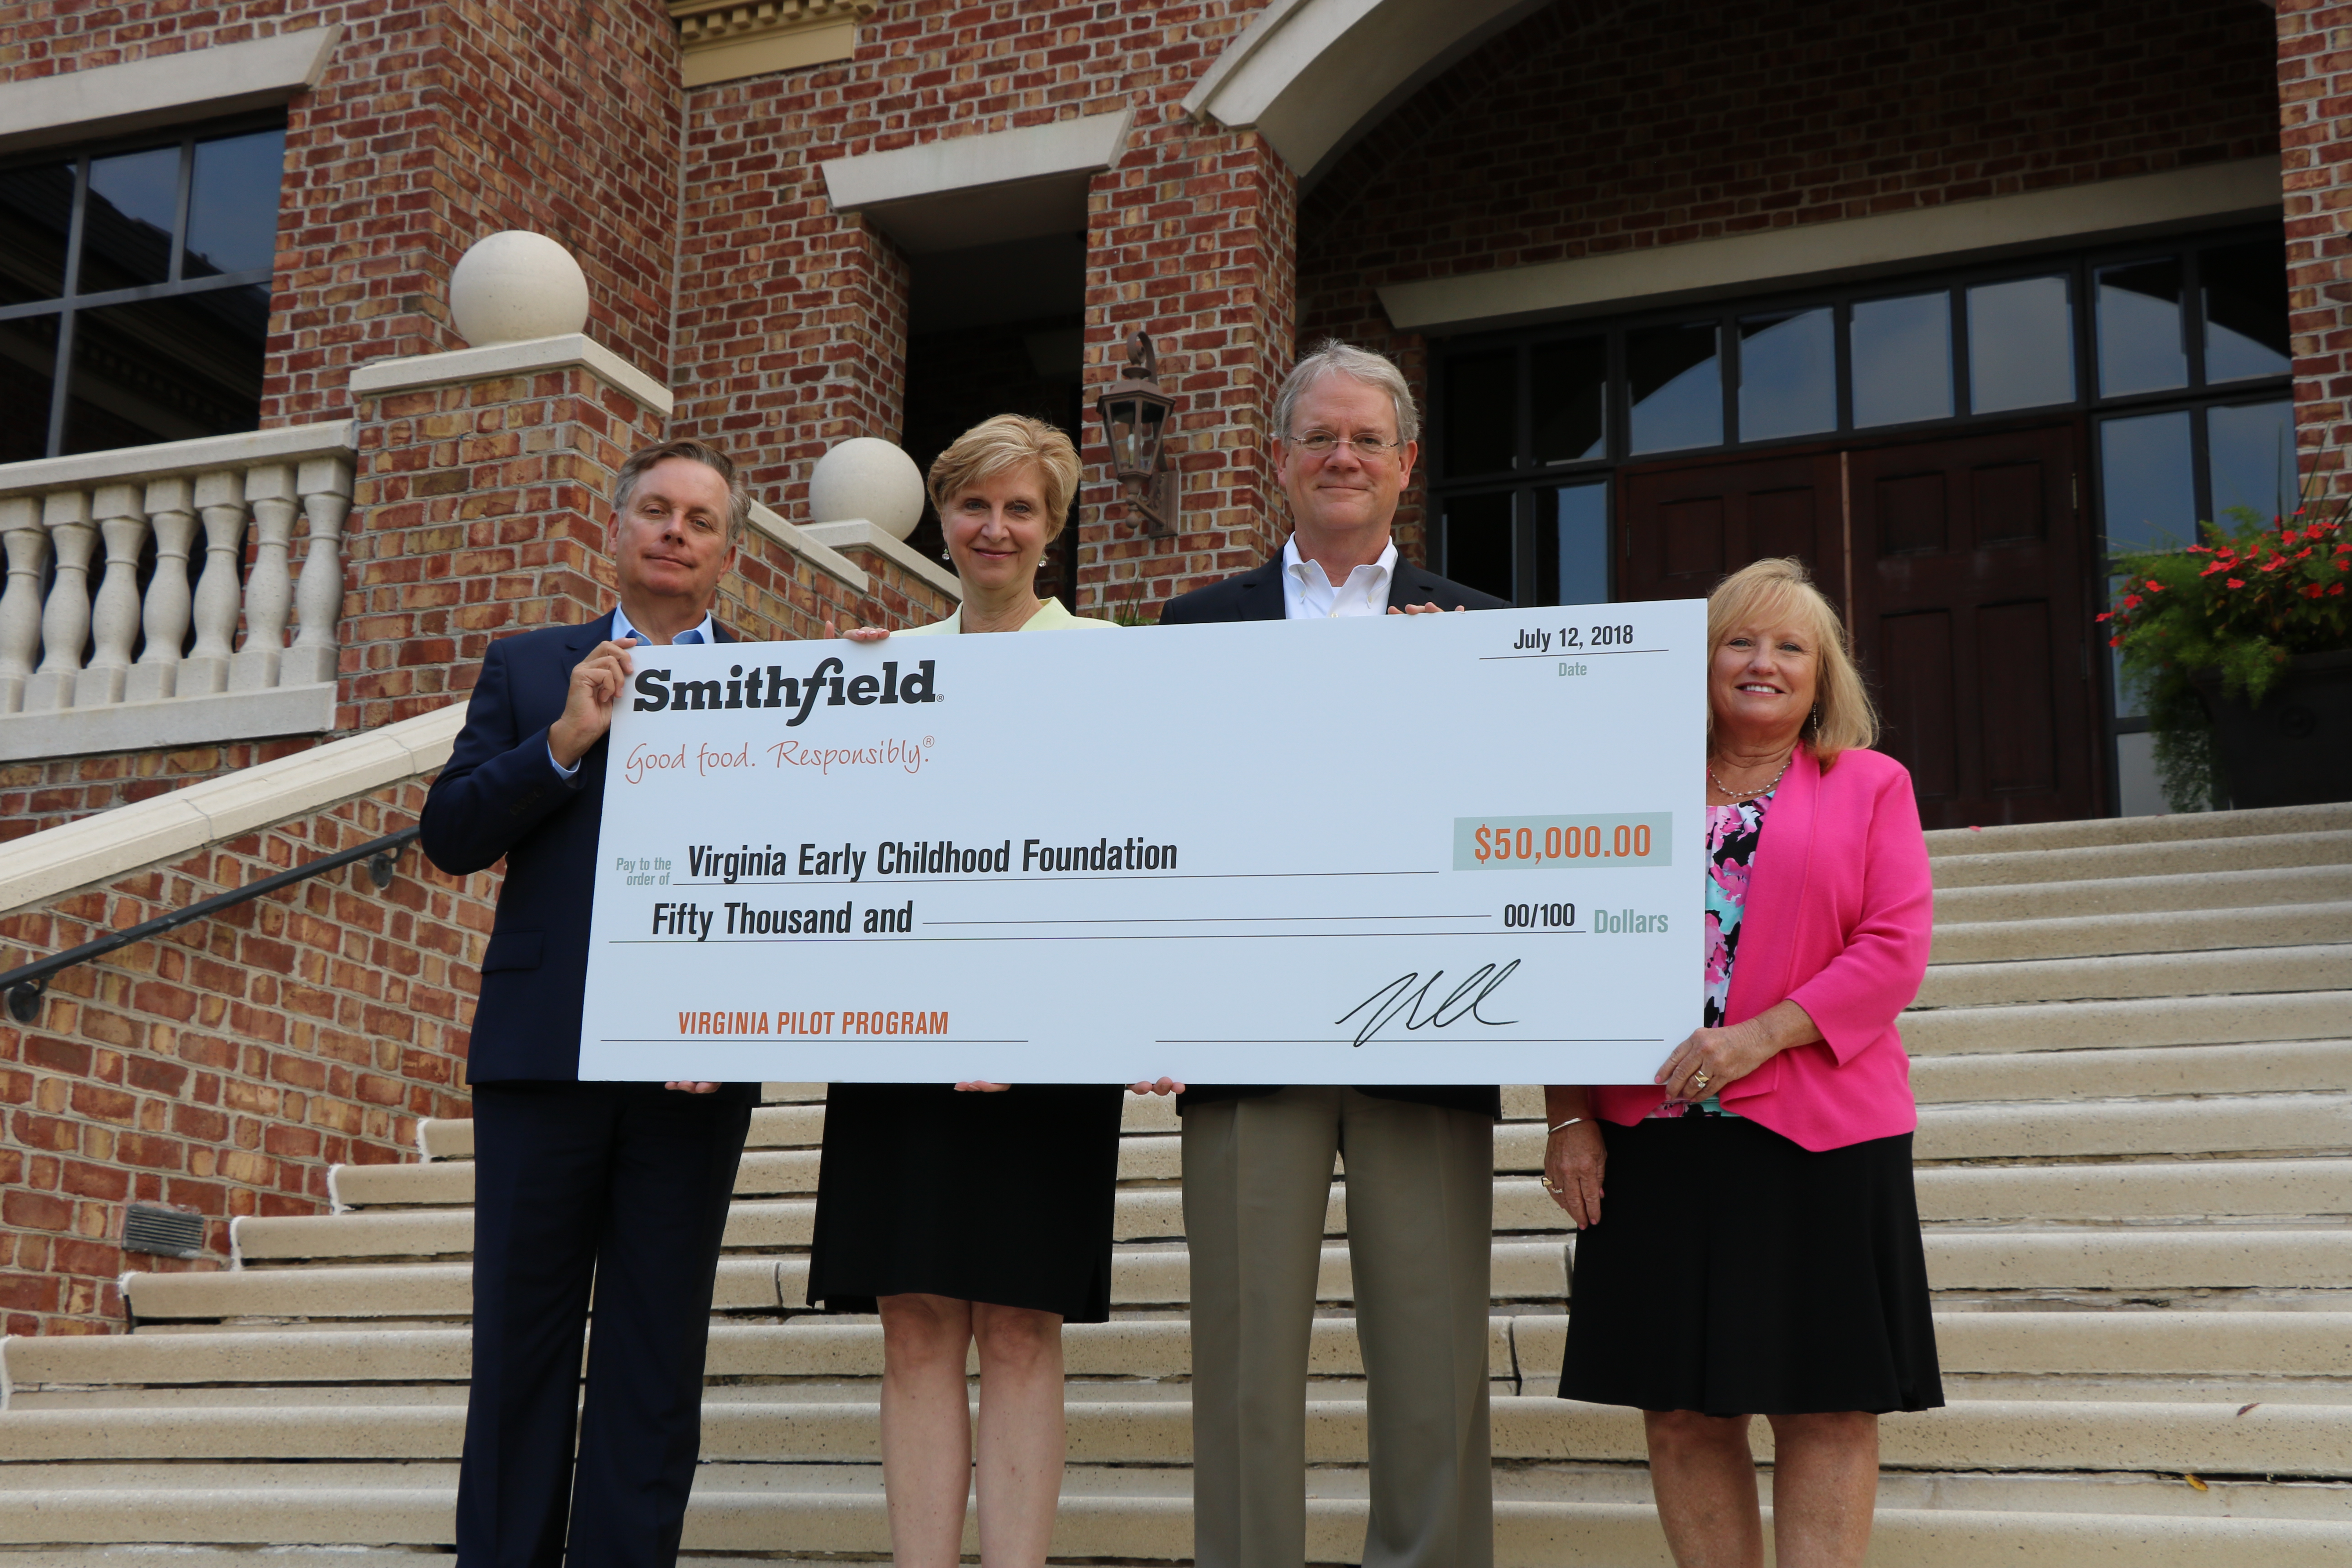 Smithfield Foods Donates $50,000 to the Virginia Early Childhood Foundation to Improve Quality and Access of Early Childhood Education